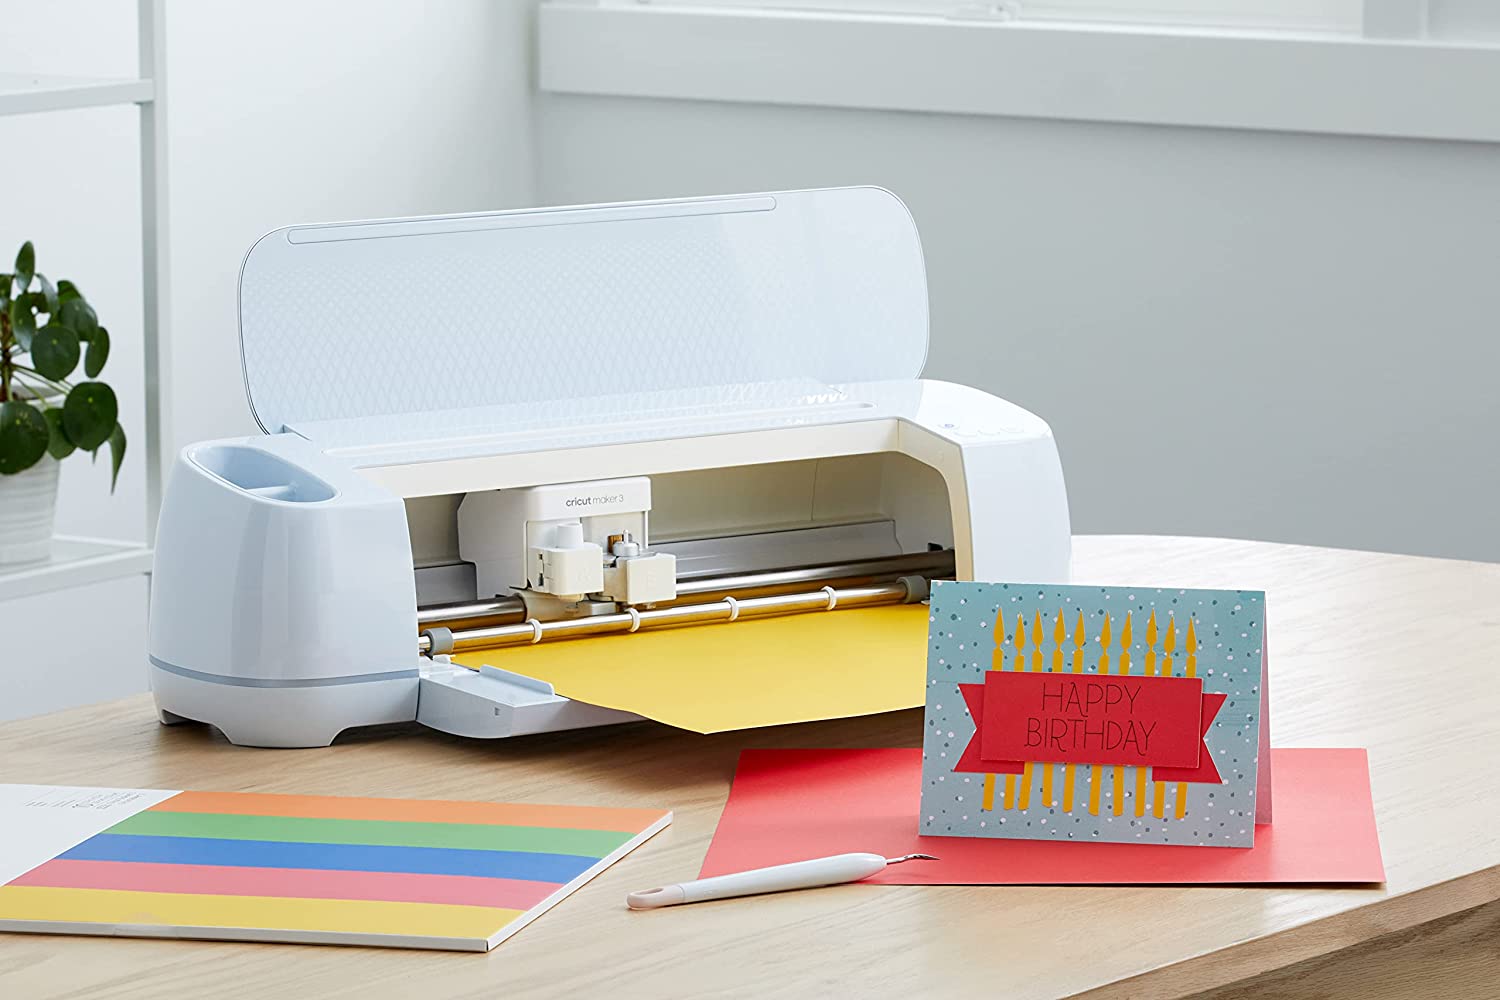 Cricut Maker 3 lets you finally explore DIY crafting at home with return to  $369 low